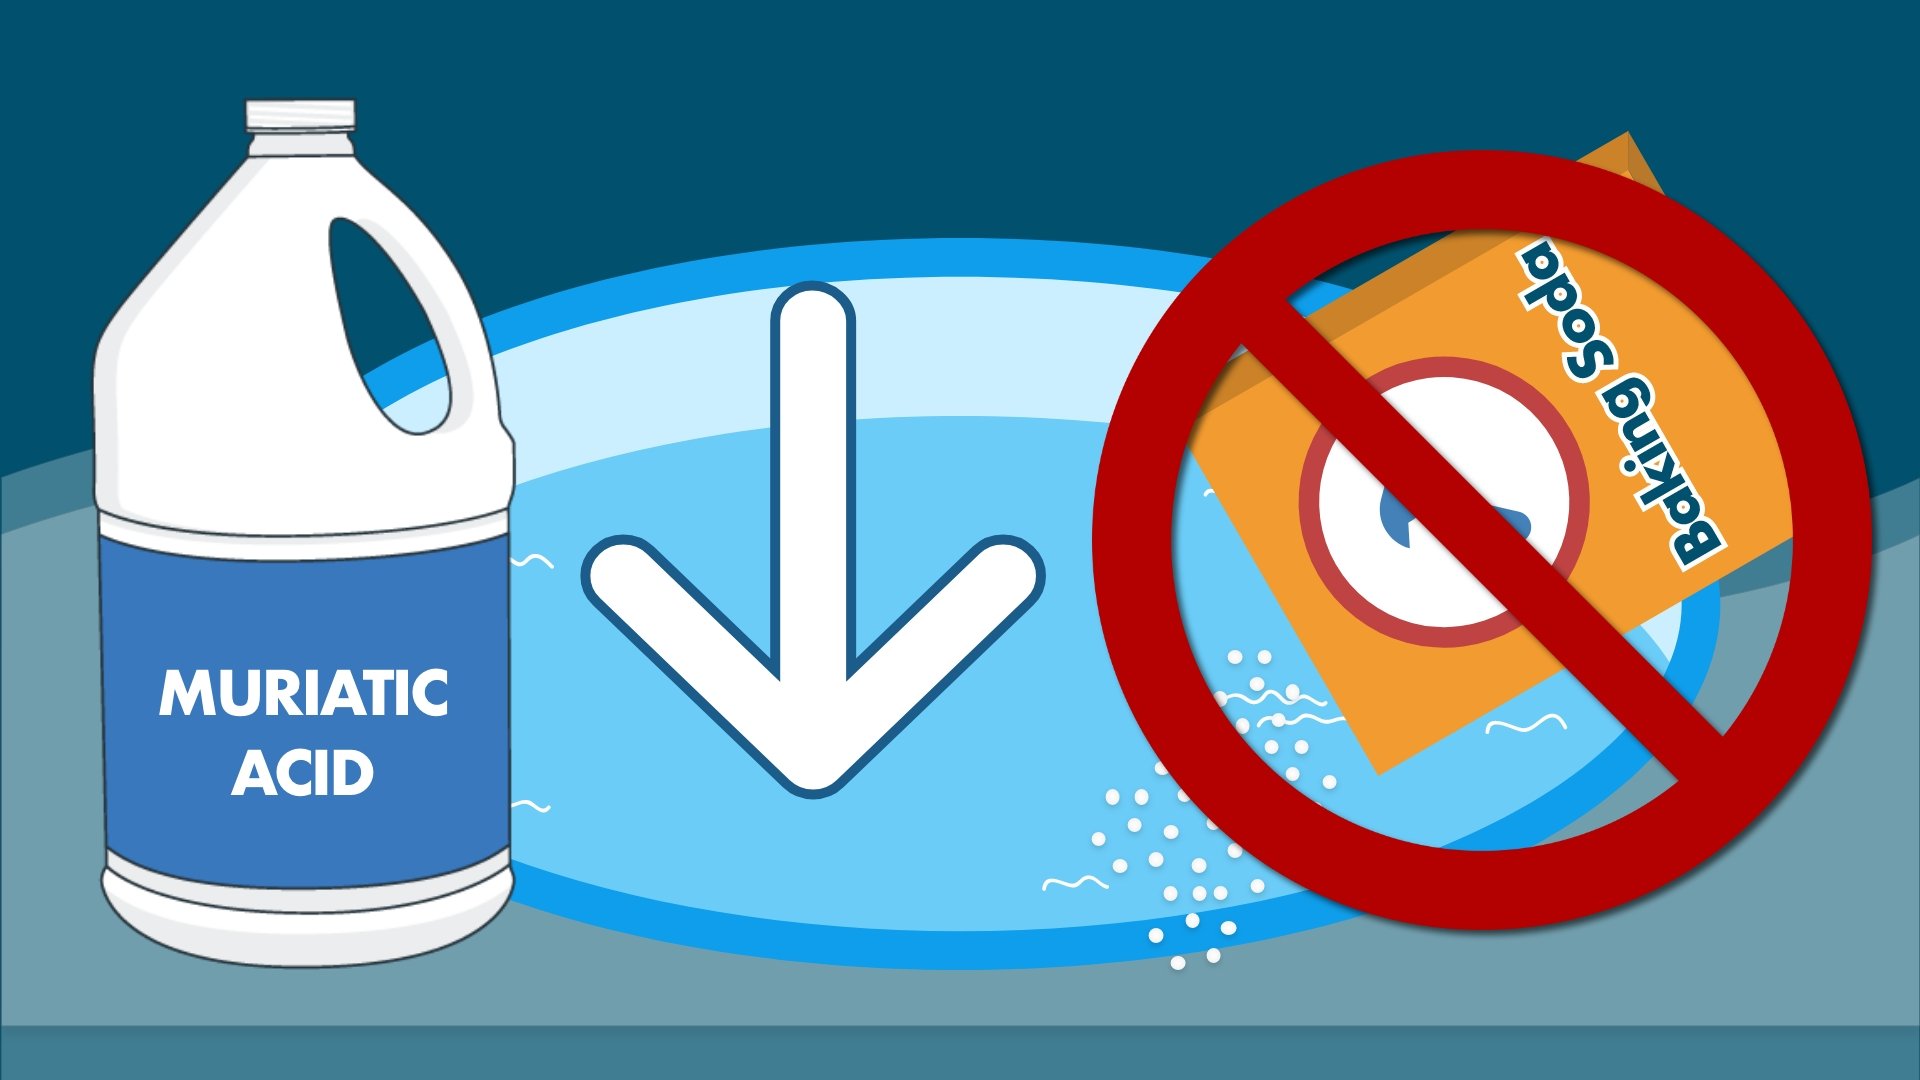 Alkalinity Too High? Here’s How to Lower Alkalinity in a Pool Quickly